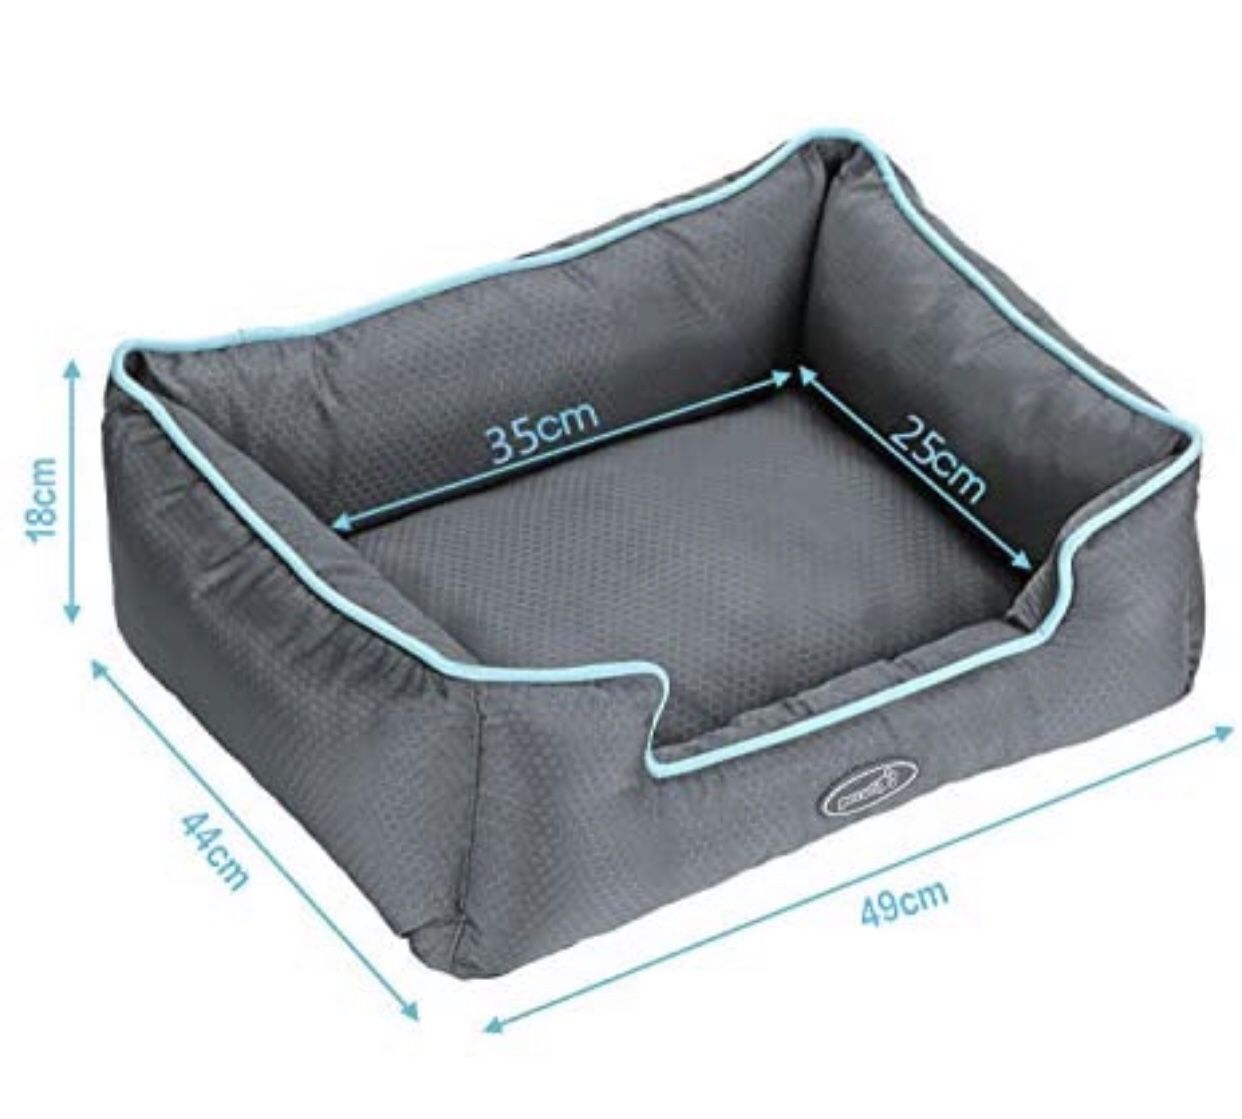 Brand new pet chew resistant dog bed